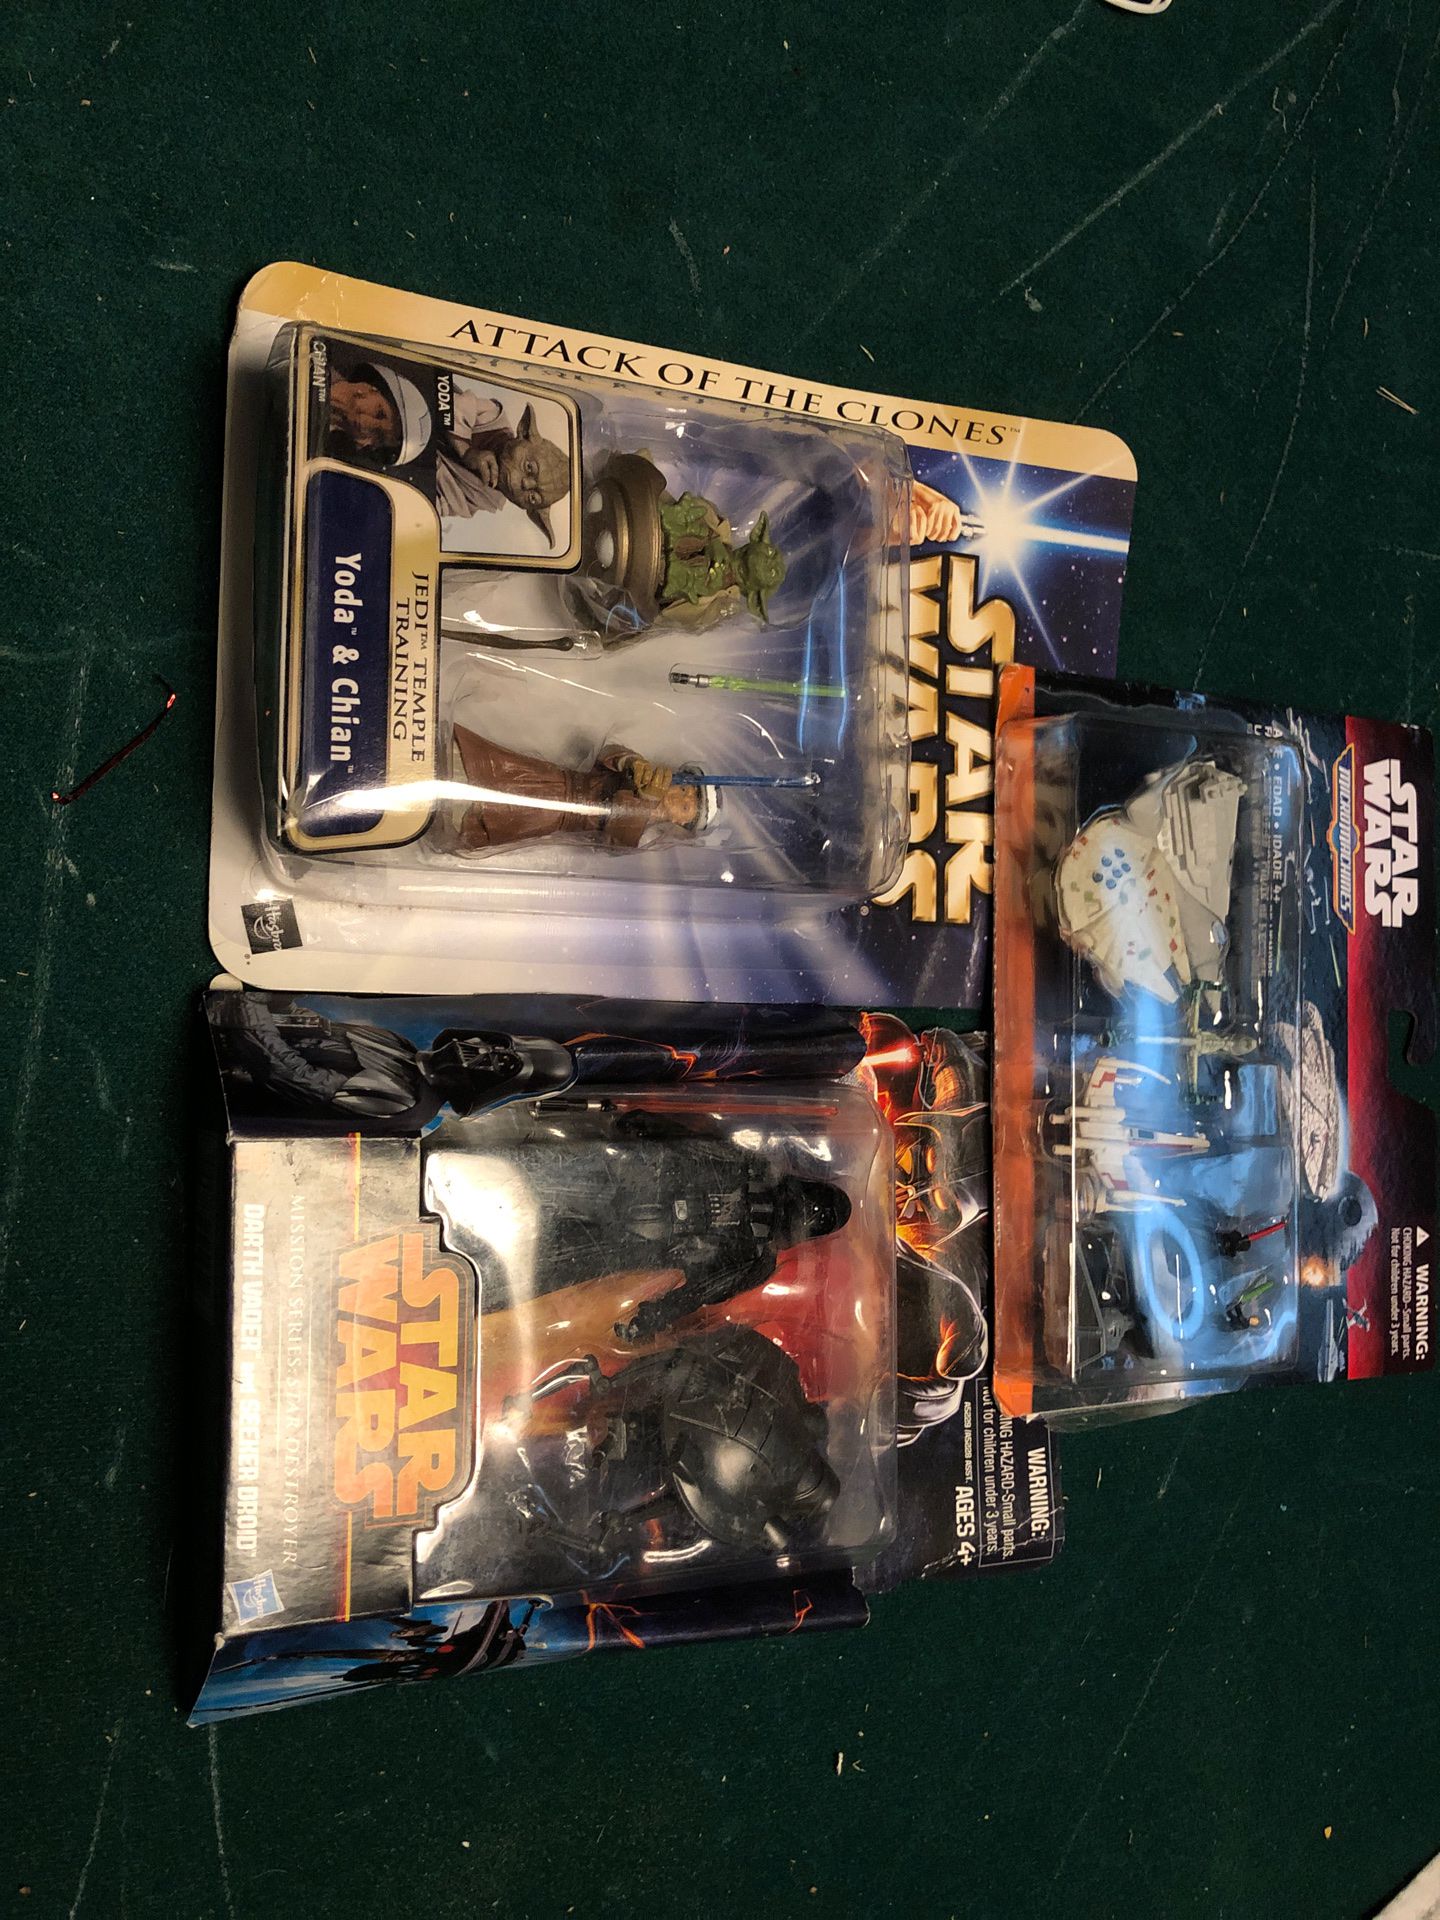 Star Wars collectible toys. New in packages.